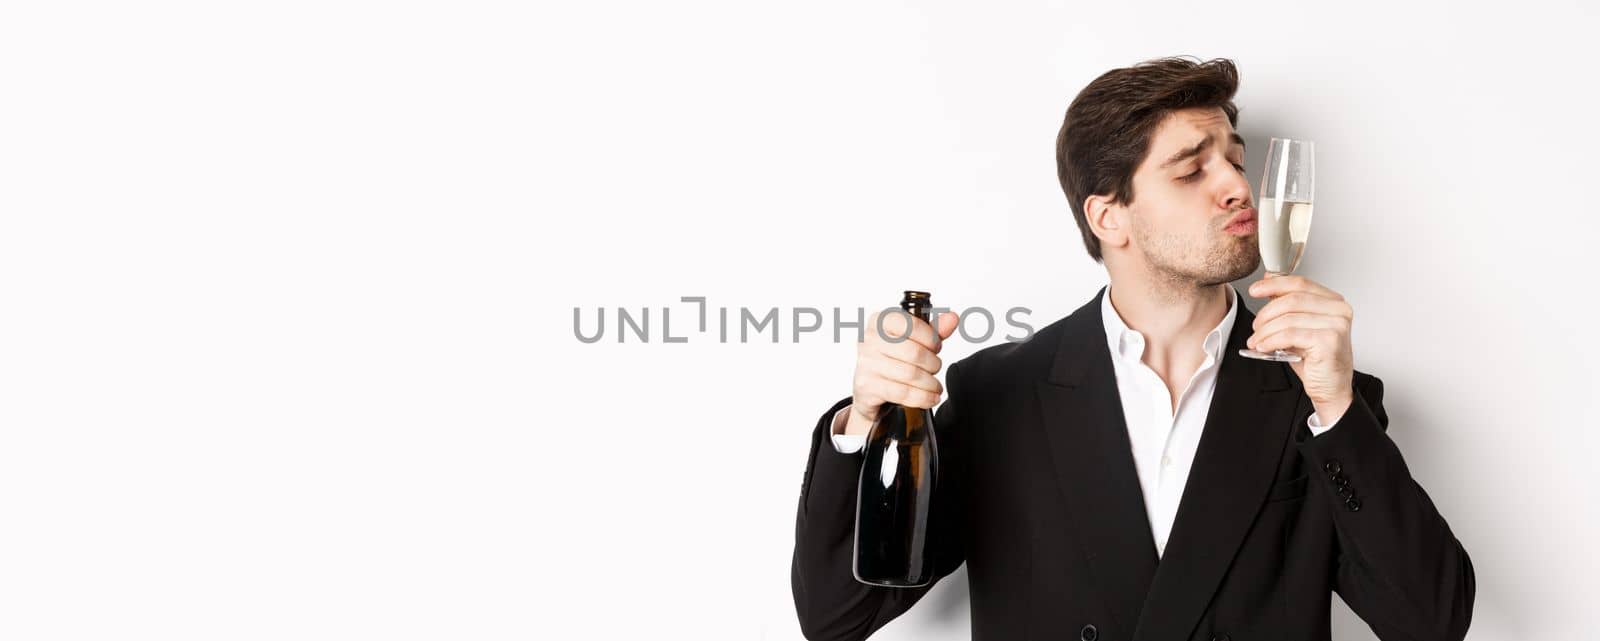 Close-up of handsome man in suit, kissing glass with champagne, getting drunk on a party, standing against white background.